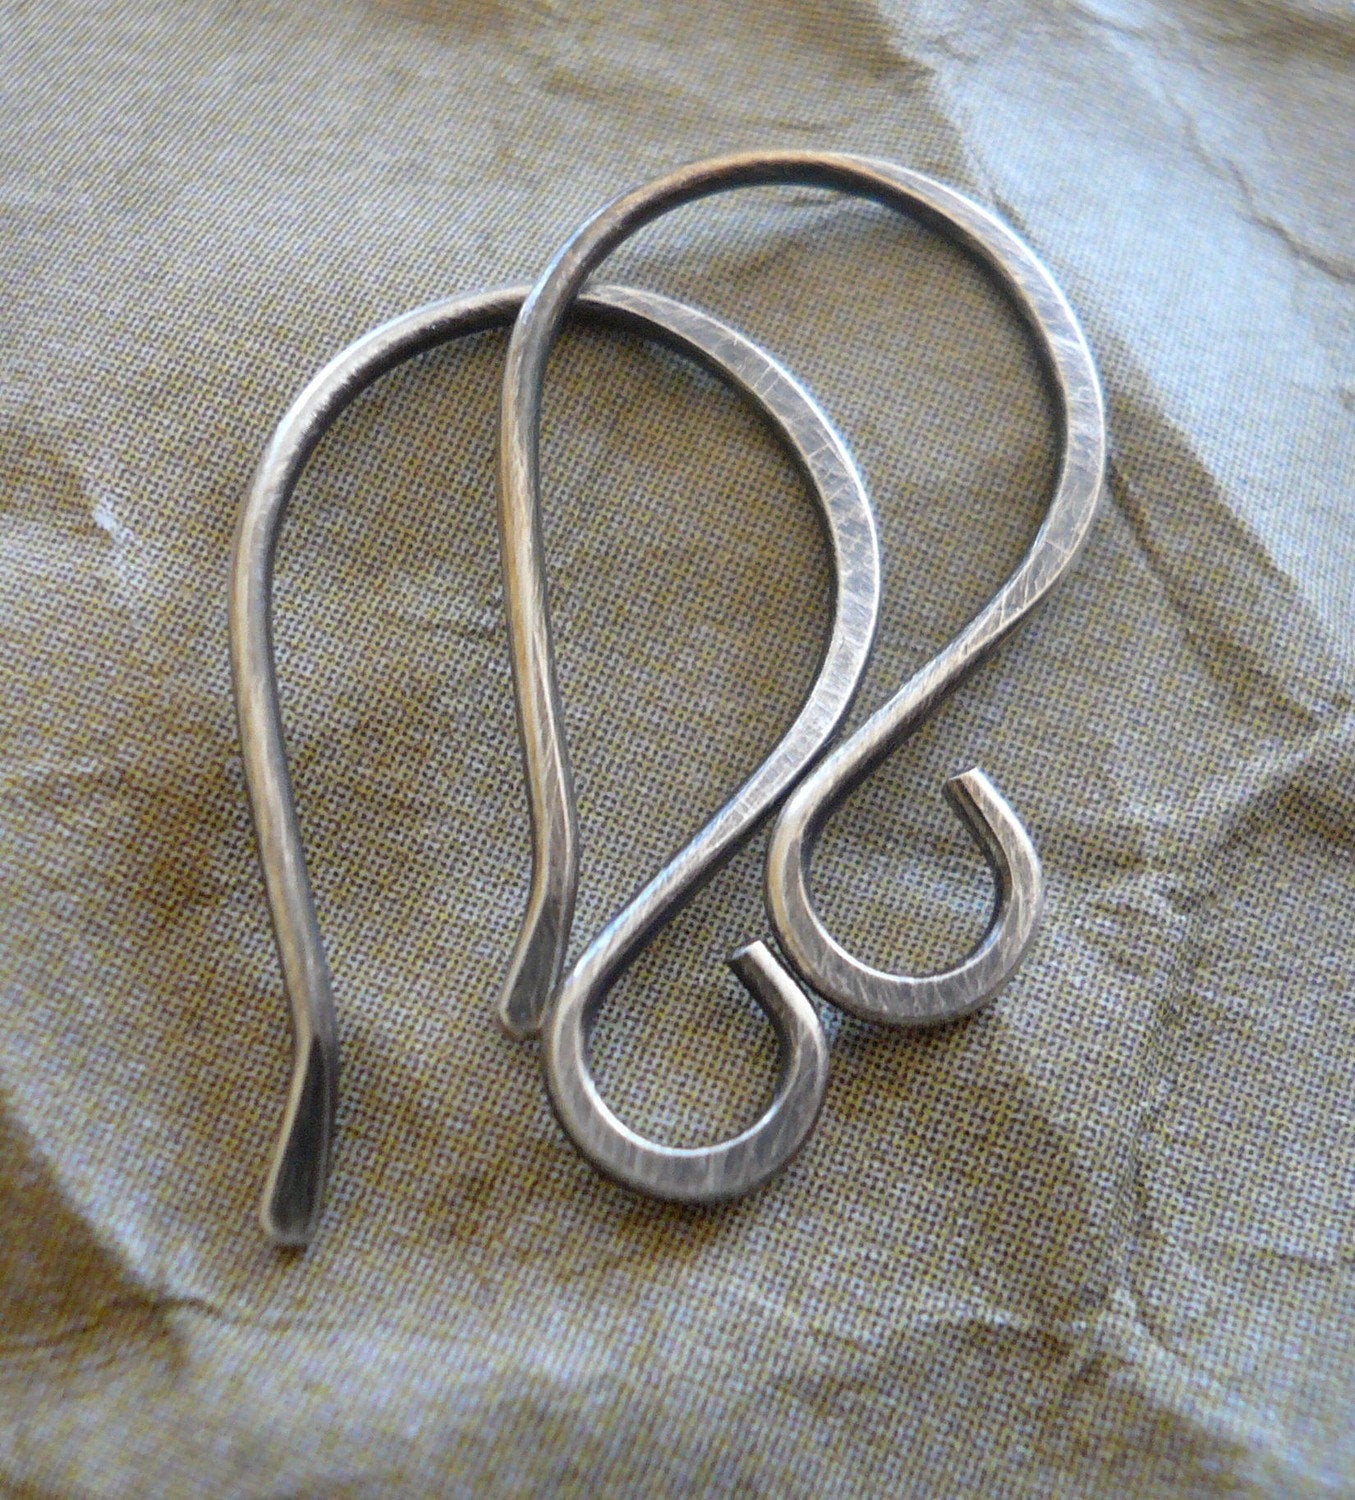 Twinkle Sterling Silver Earwires - Handmade. Handforged. Oxidized and polished